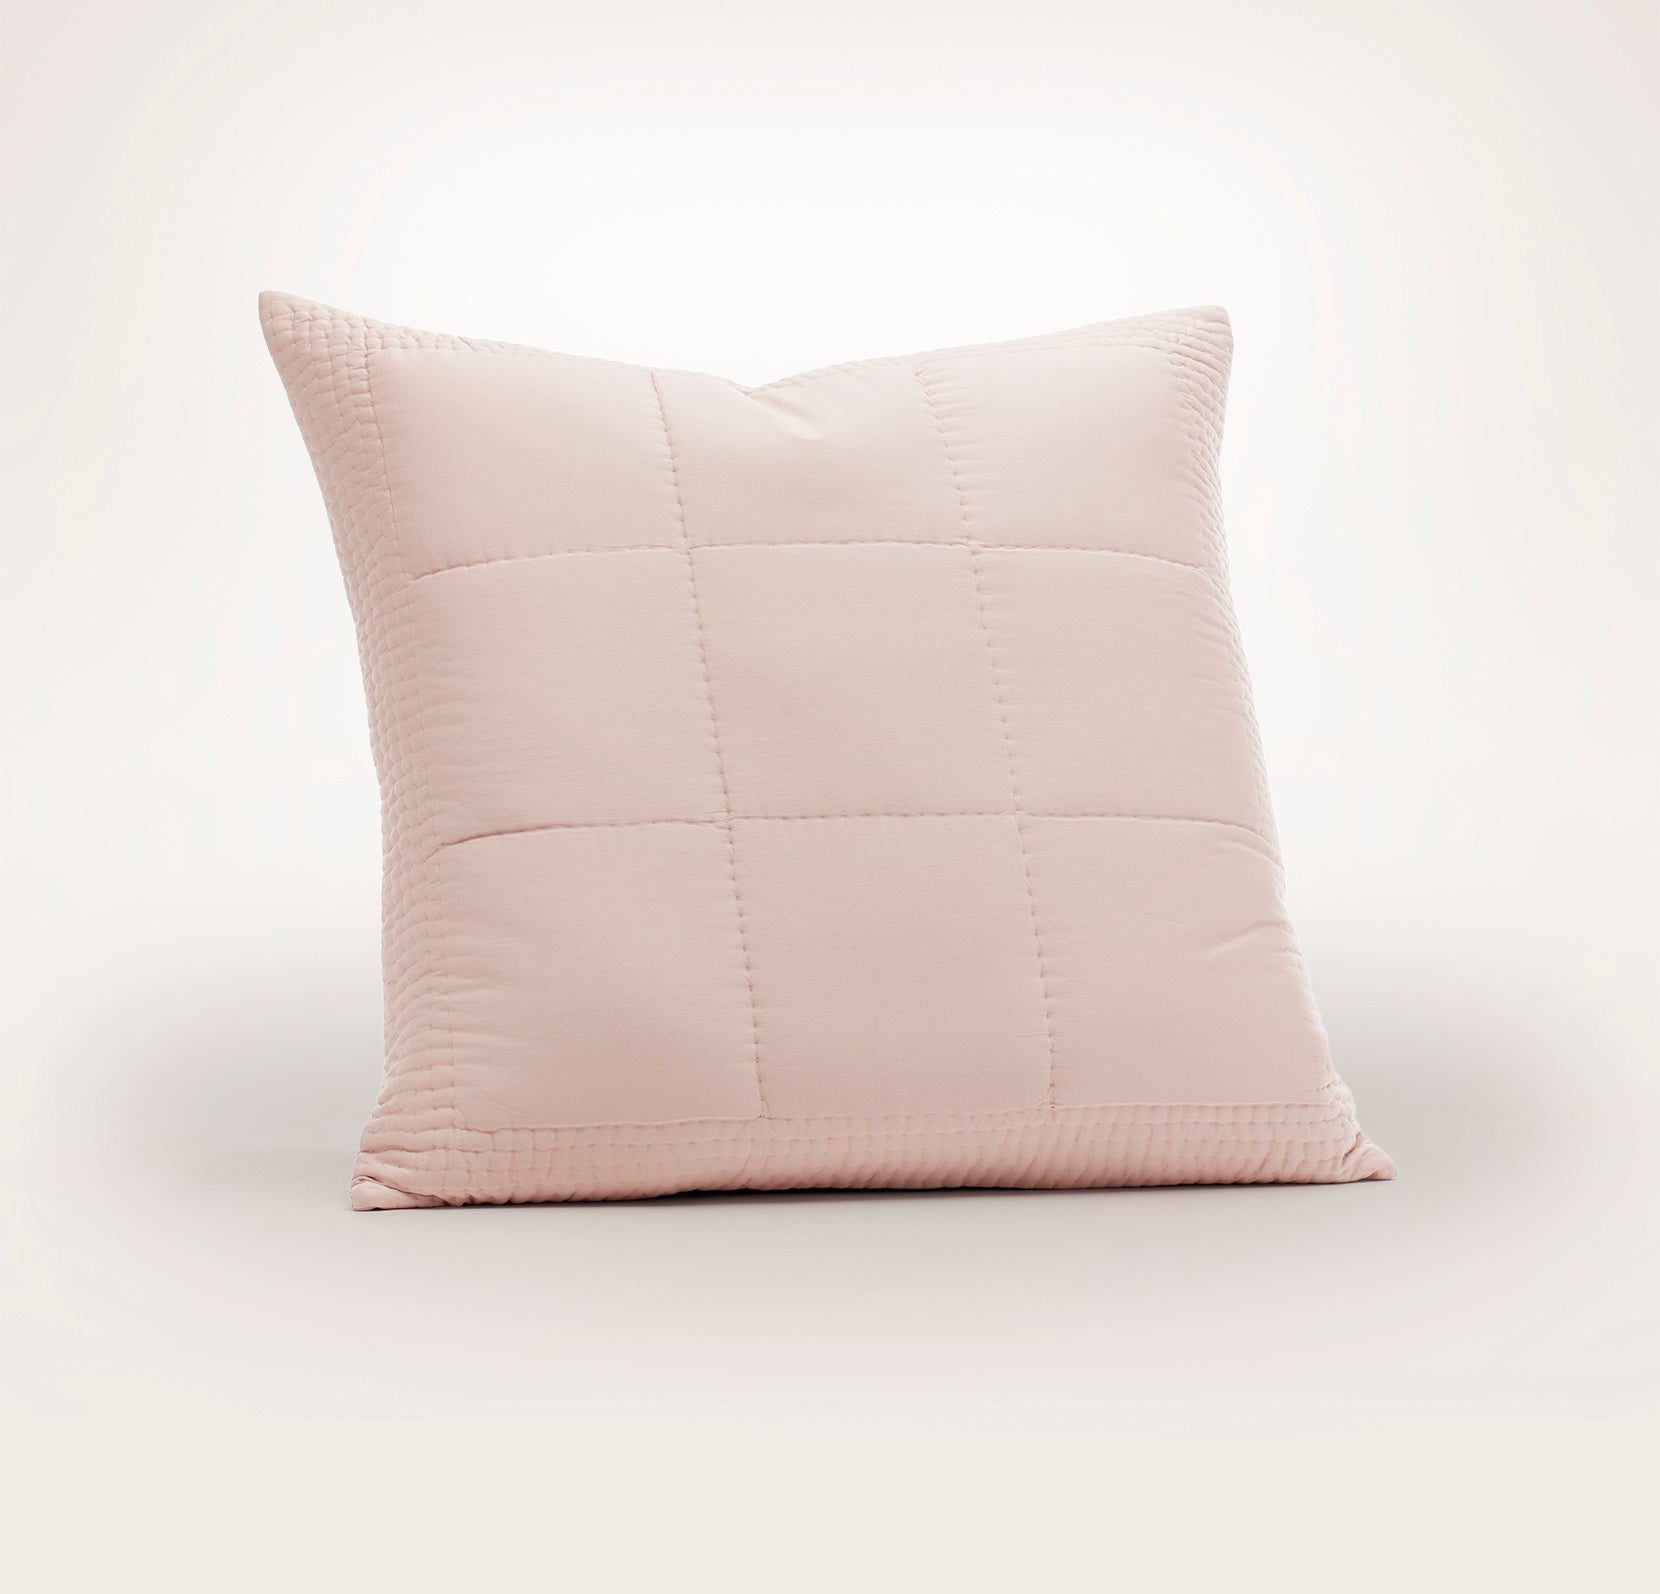 Signature Handstitched Quilted Sham in Dusty Rose